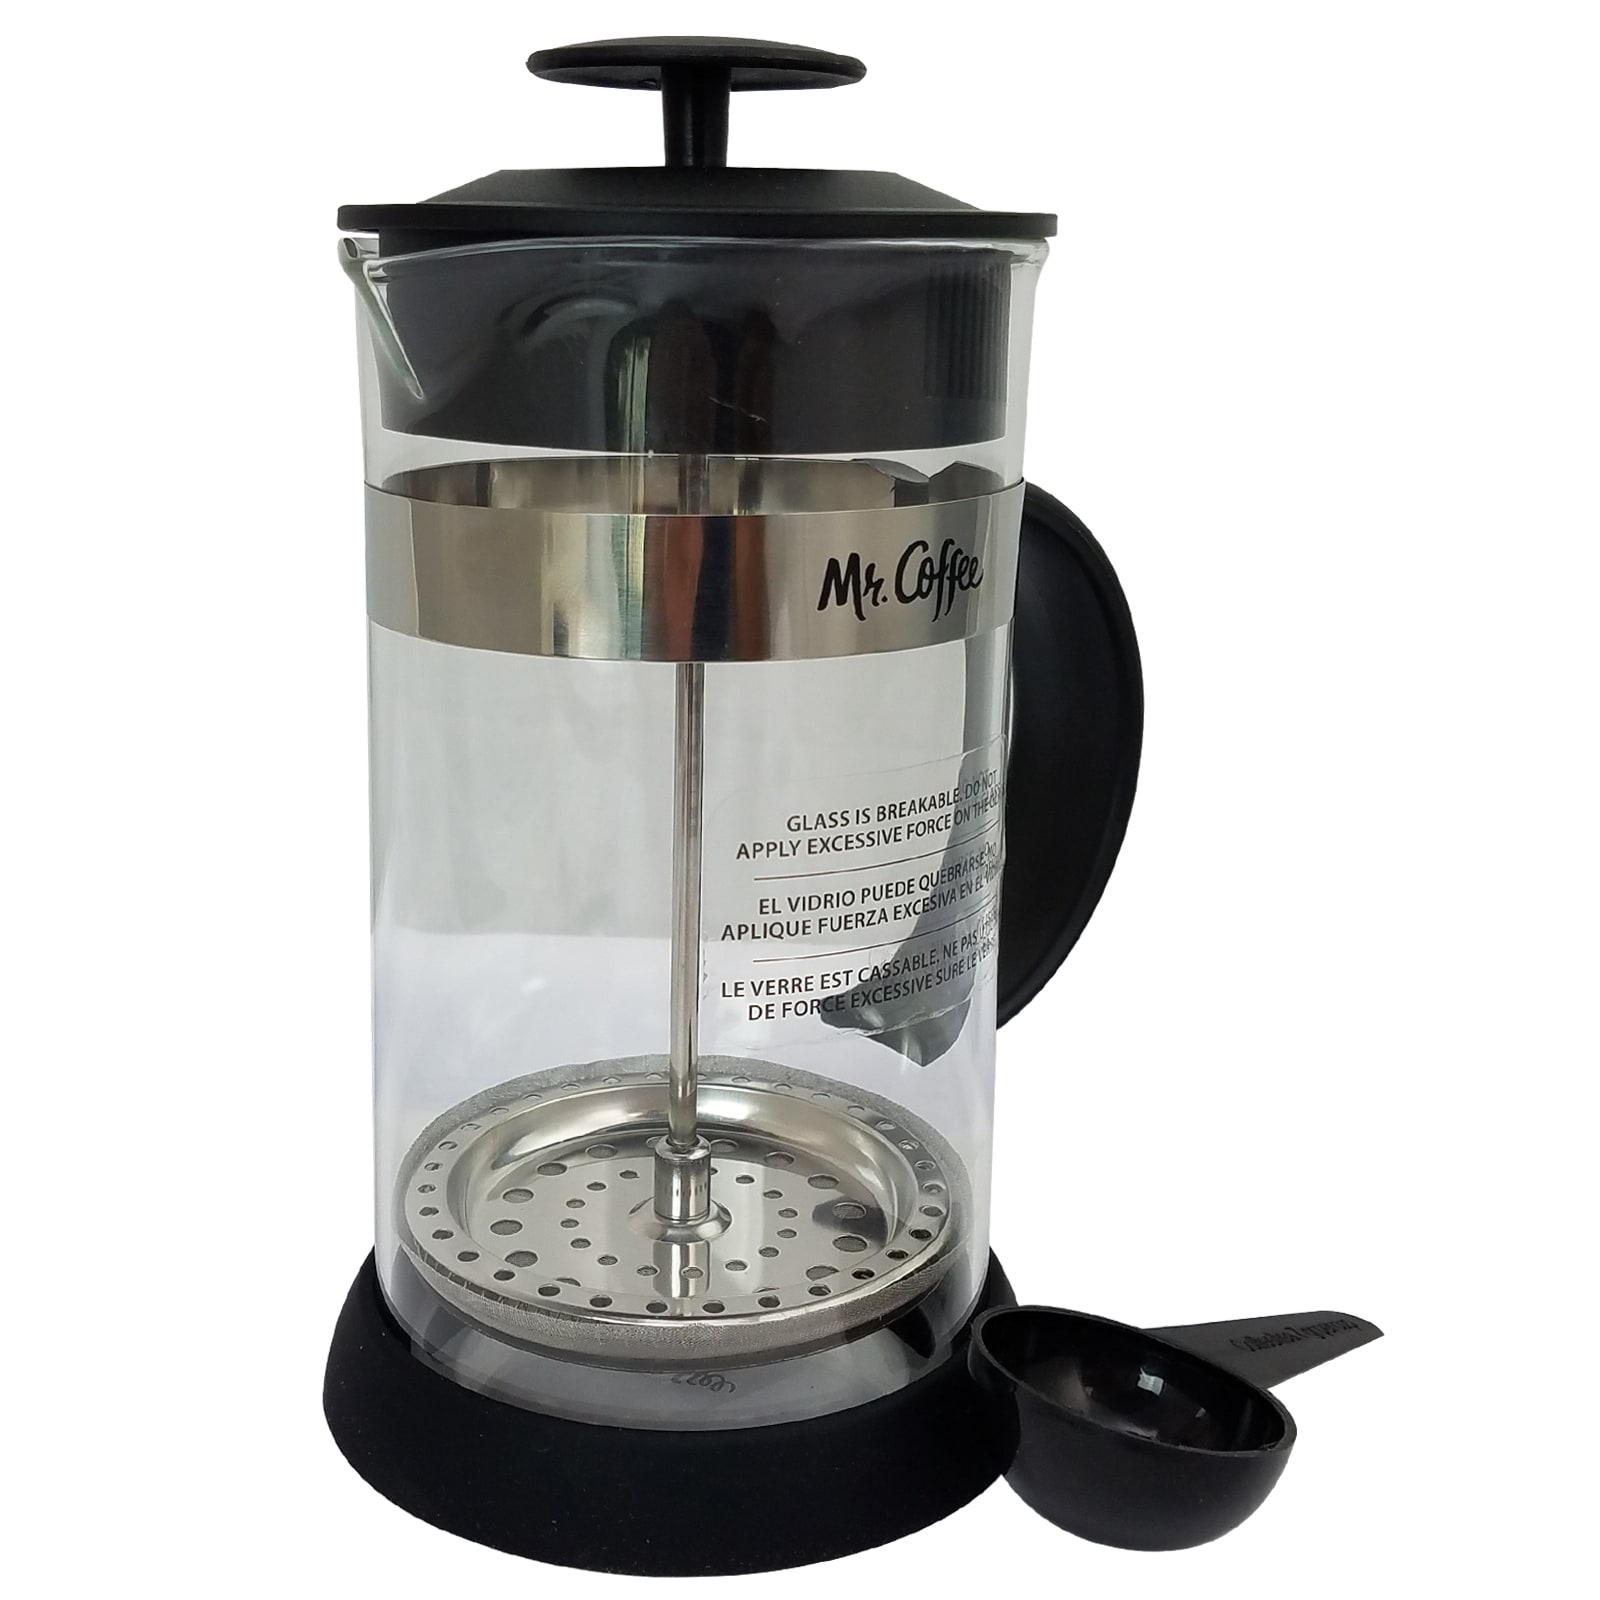 https://ak1.ostkcdn.com/images/products/is/images/direct/76af1b6002f16c071395a8fff15123d0100c75e7/Mr.-Coffee-Cafe-Oasis-32-Ounce-Quart-Glass-Body-French-Press-Coffee-Maker.jpg